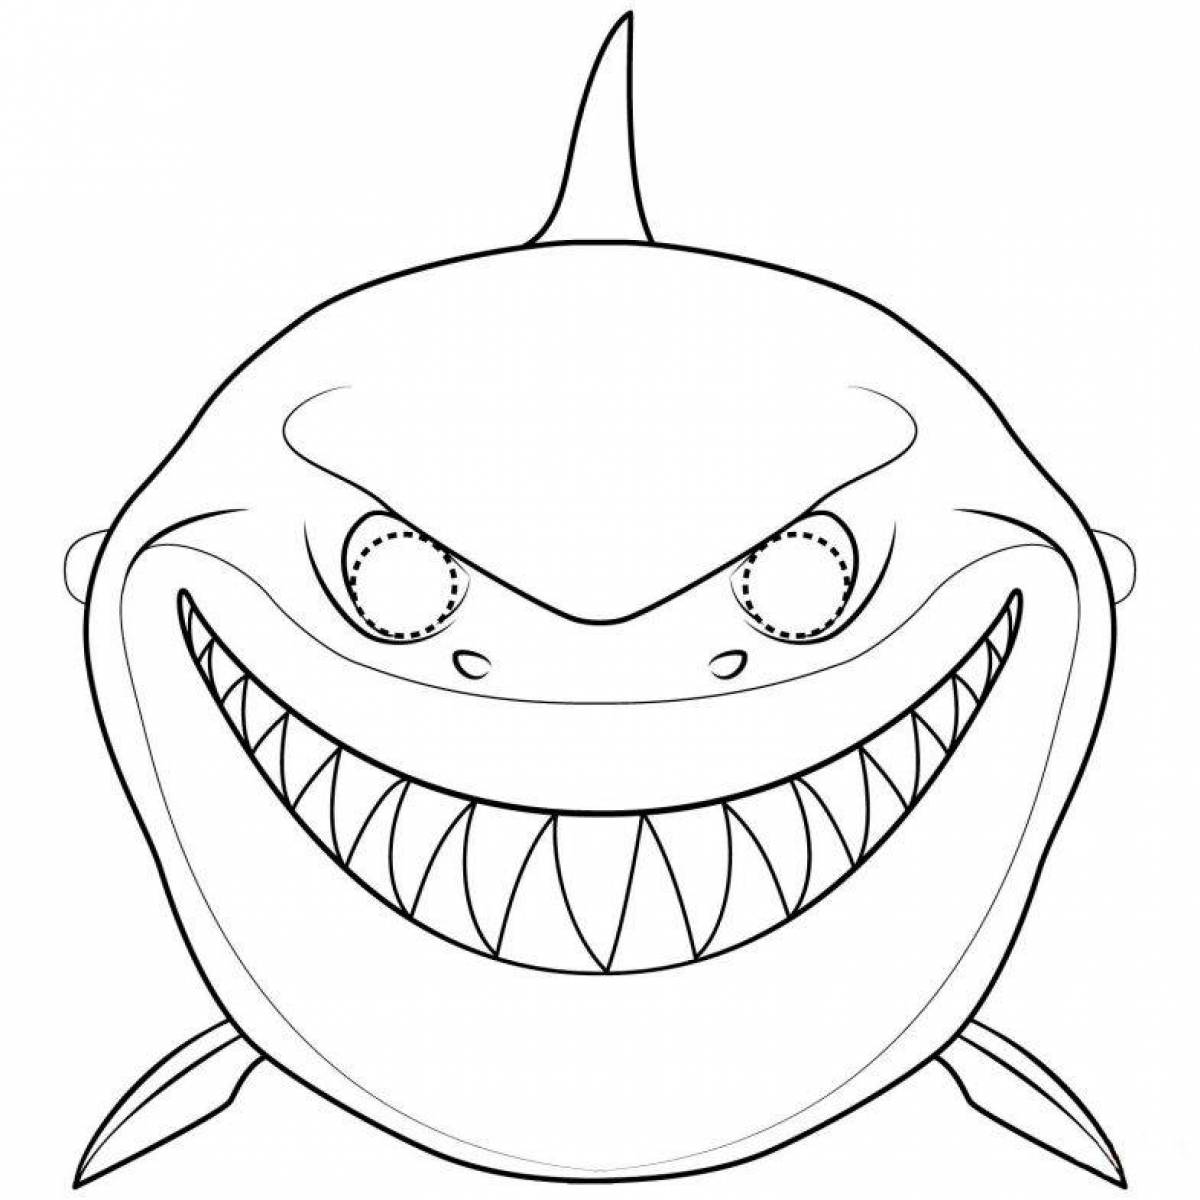 Creative shark coloring for kids